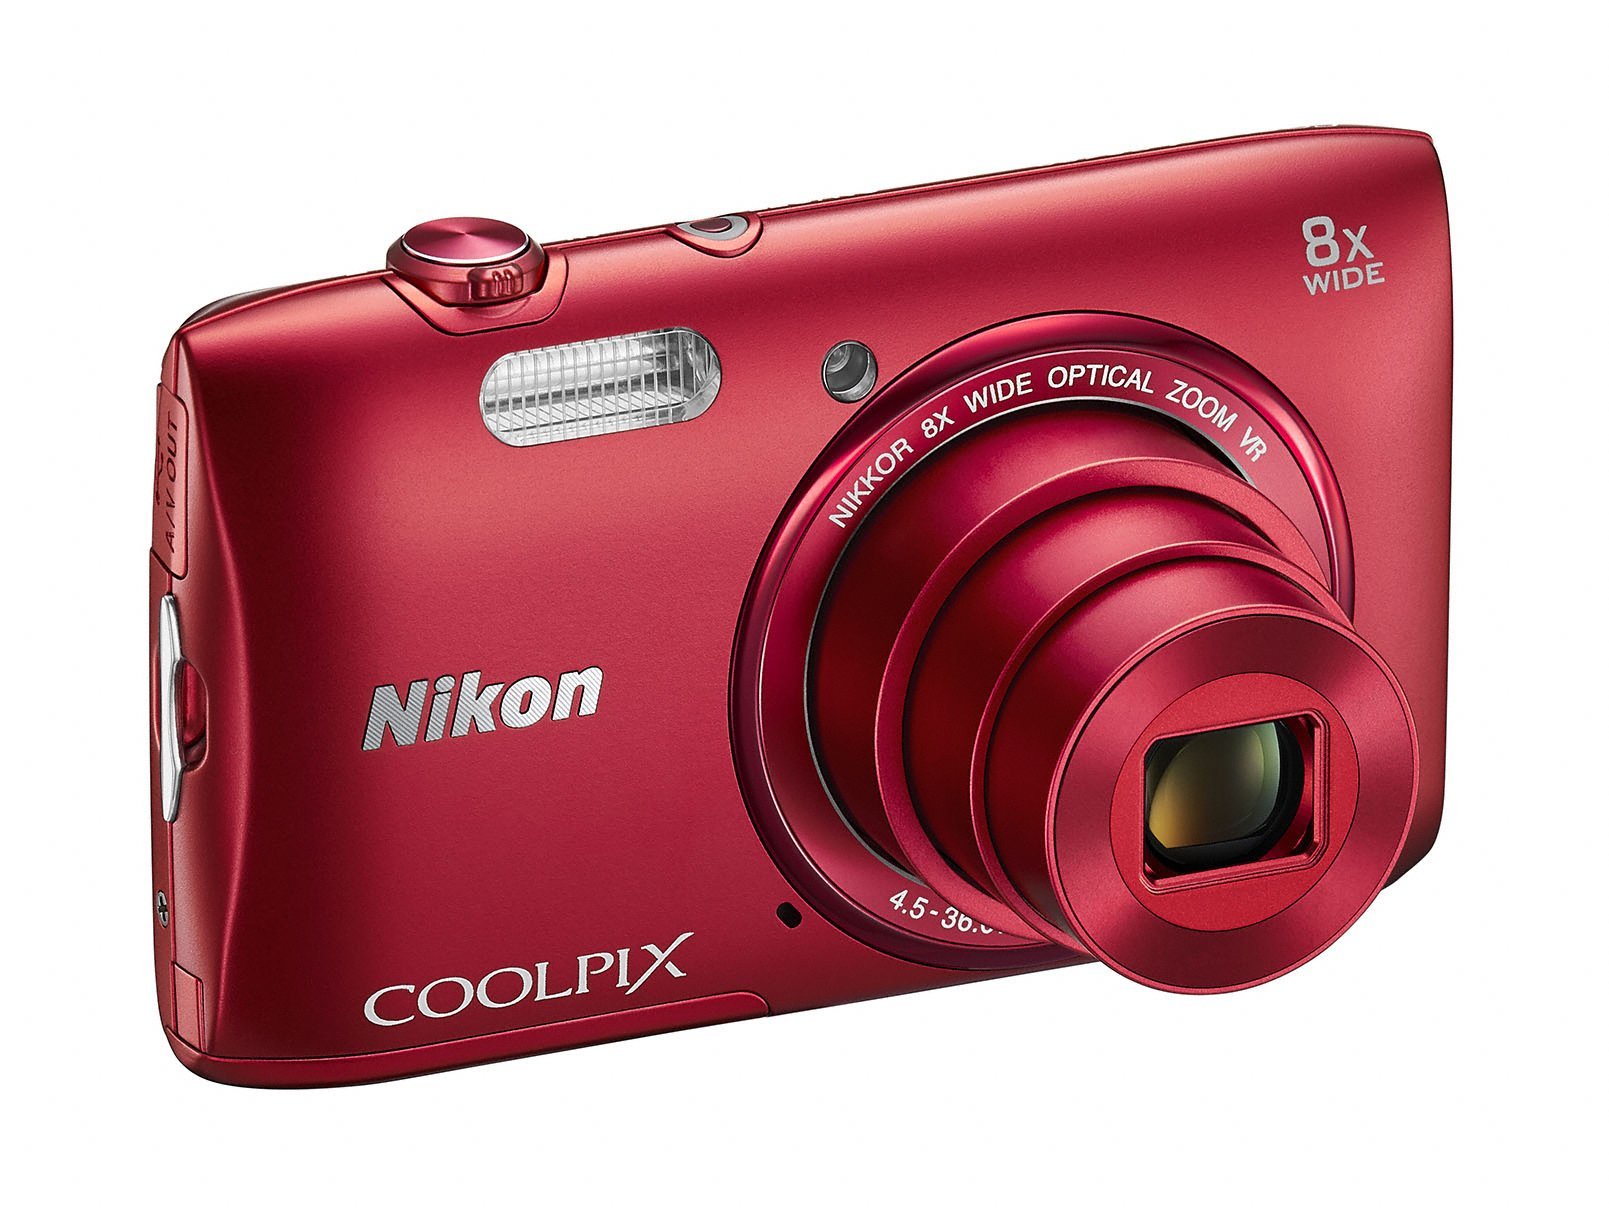 Nikon COOLPIX S3600 20.1 MP Digital Camera with 8x Zoom NIKKOR Lens and 720p HD Video (Red) (Discontinued by Manufacturer)